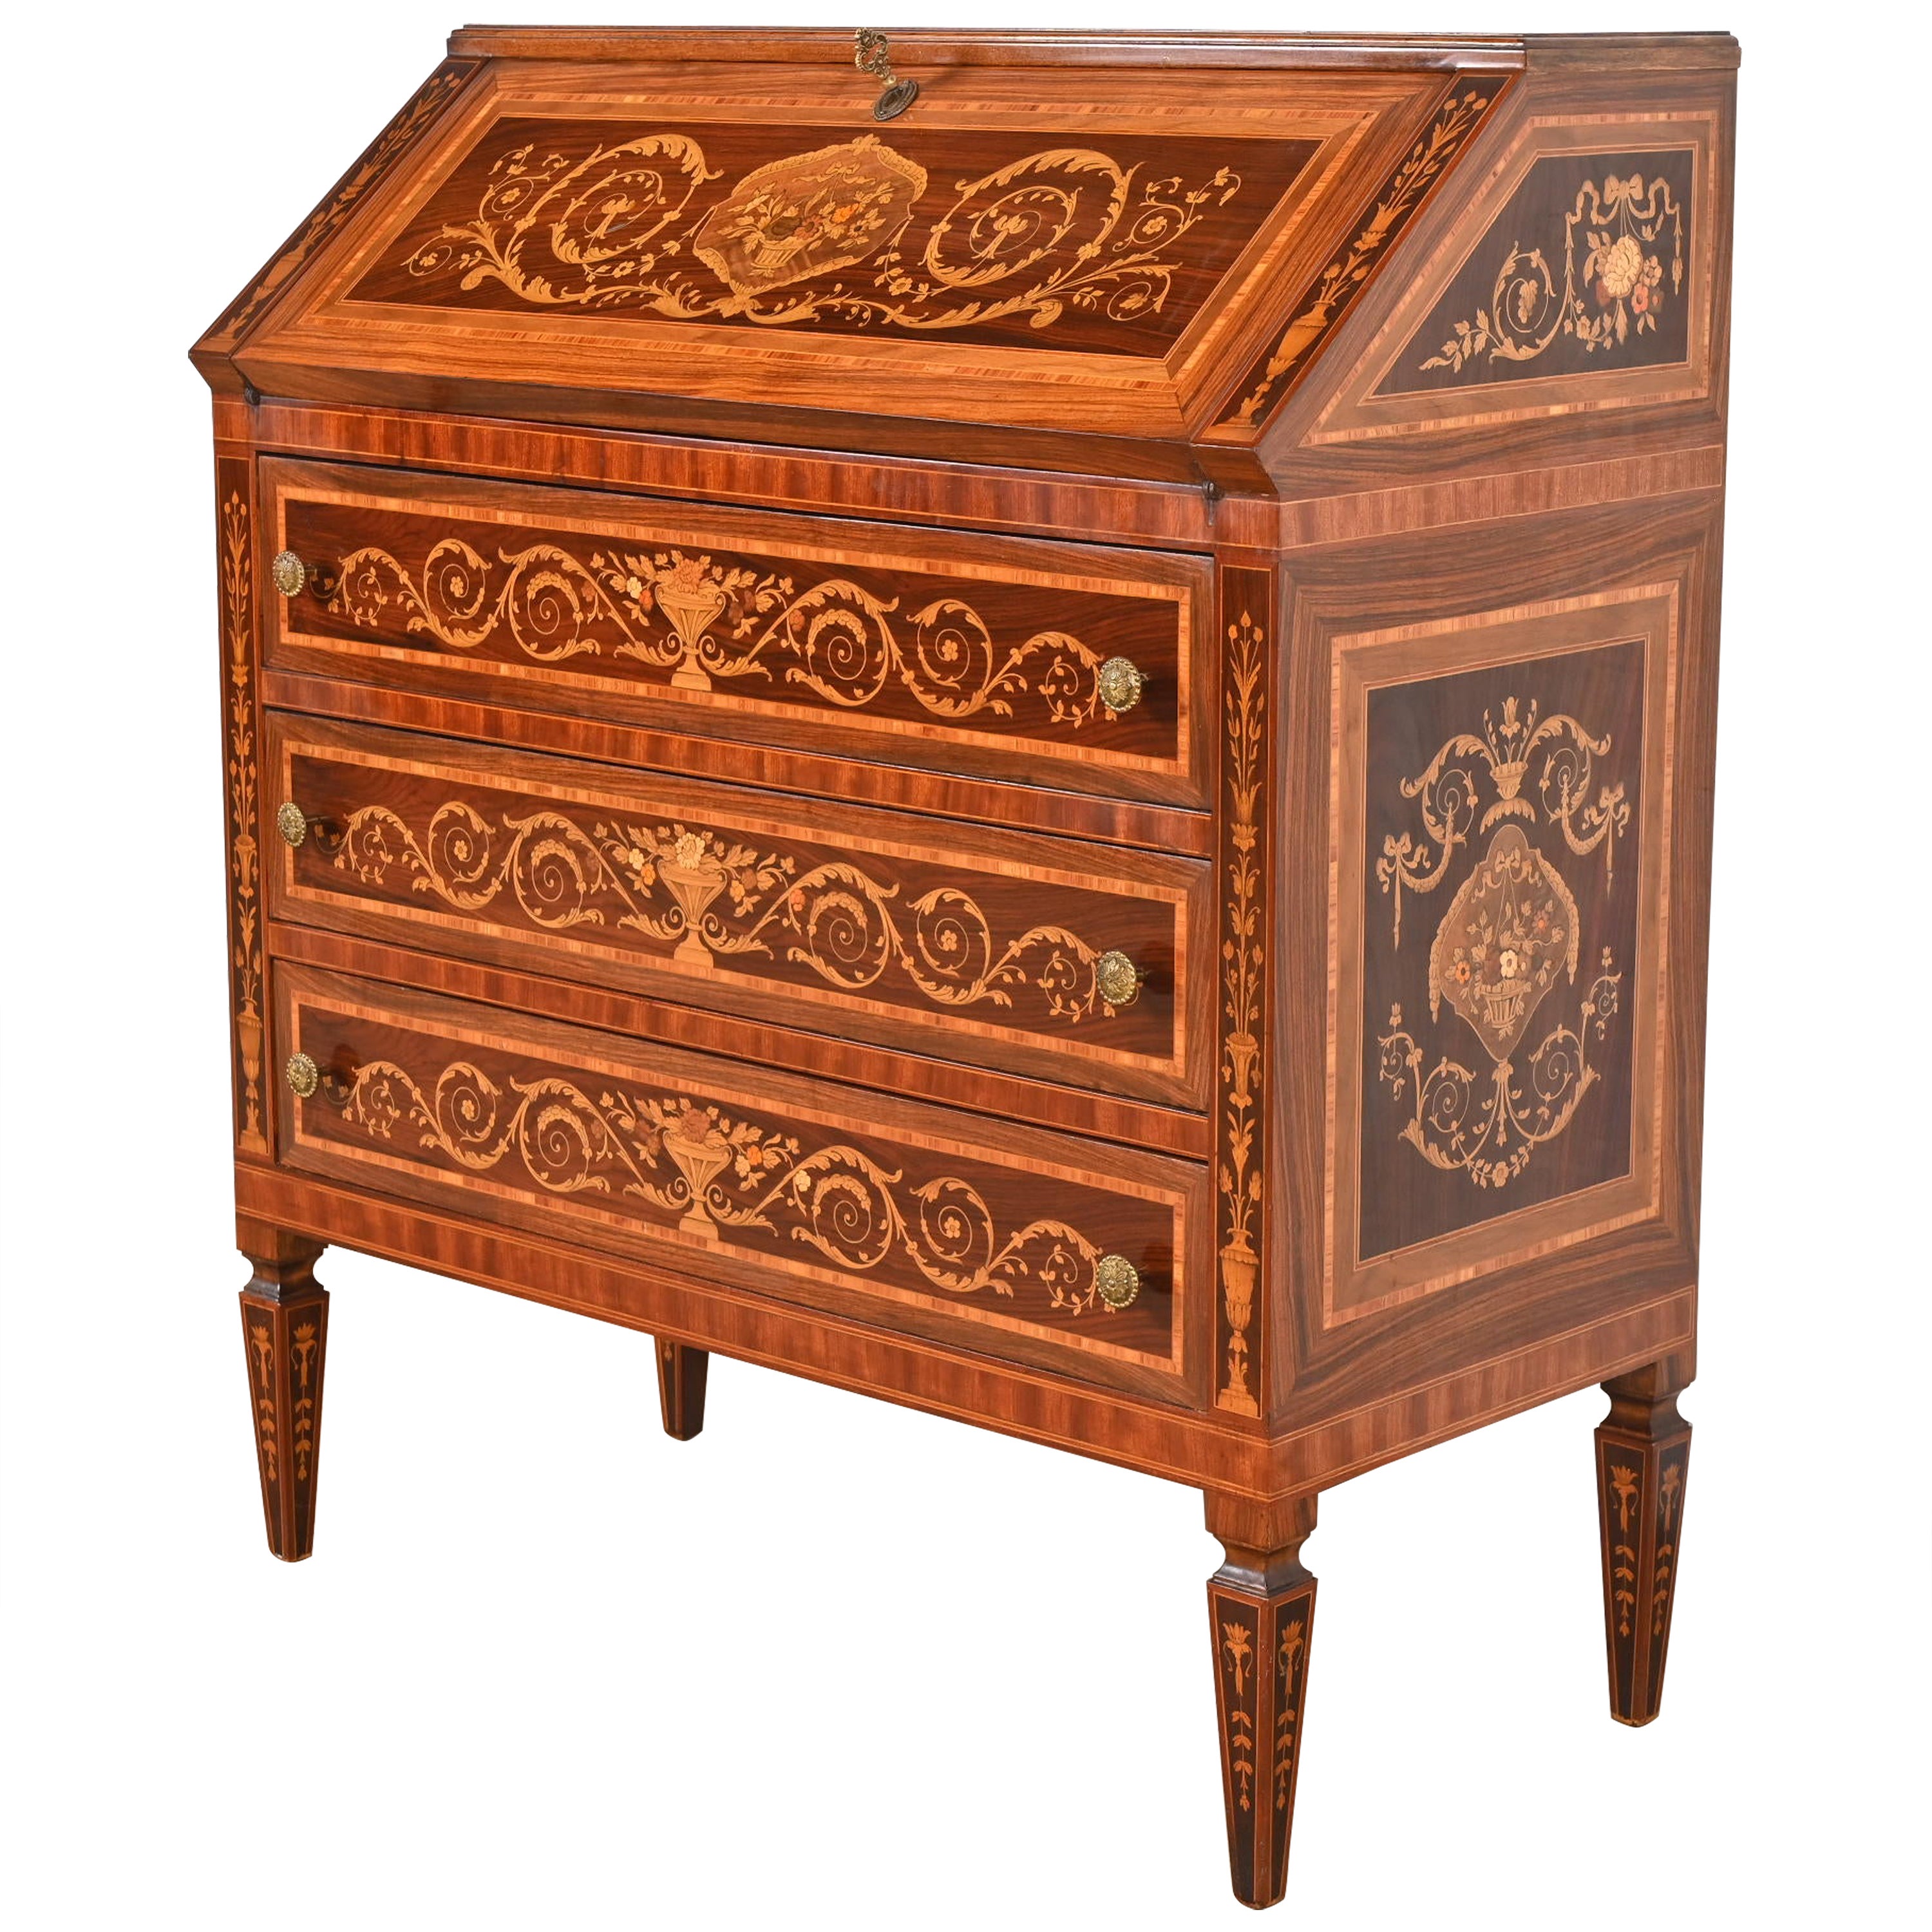 Italian Neoclassical Rosewood Inlaid Marquetry Slant Front Secretary Desk